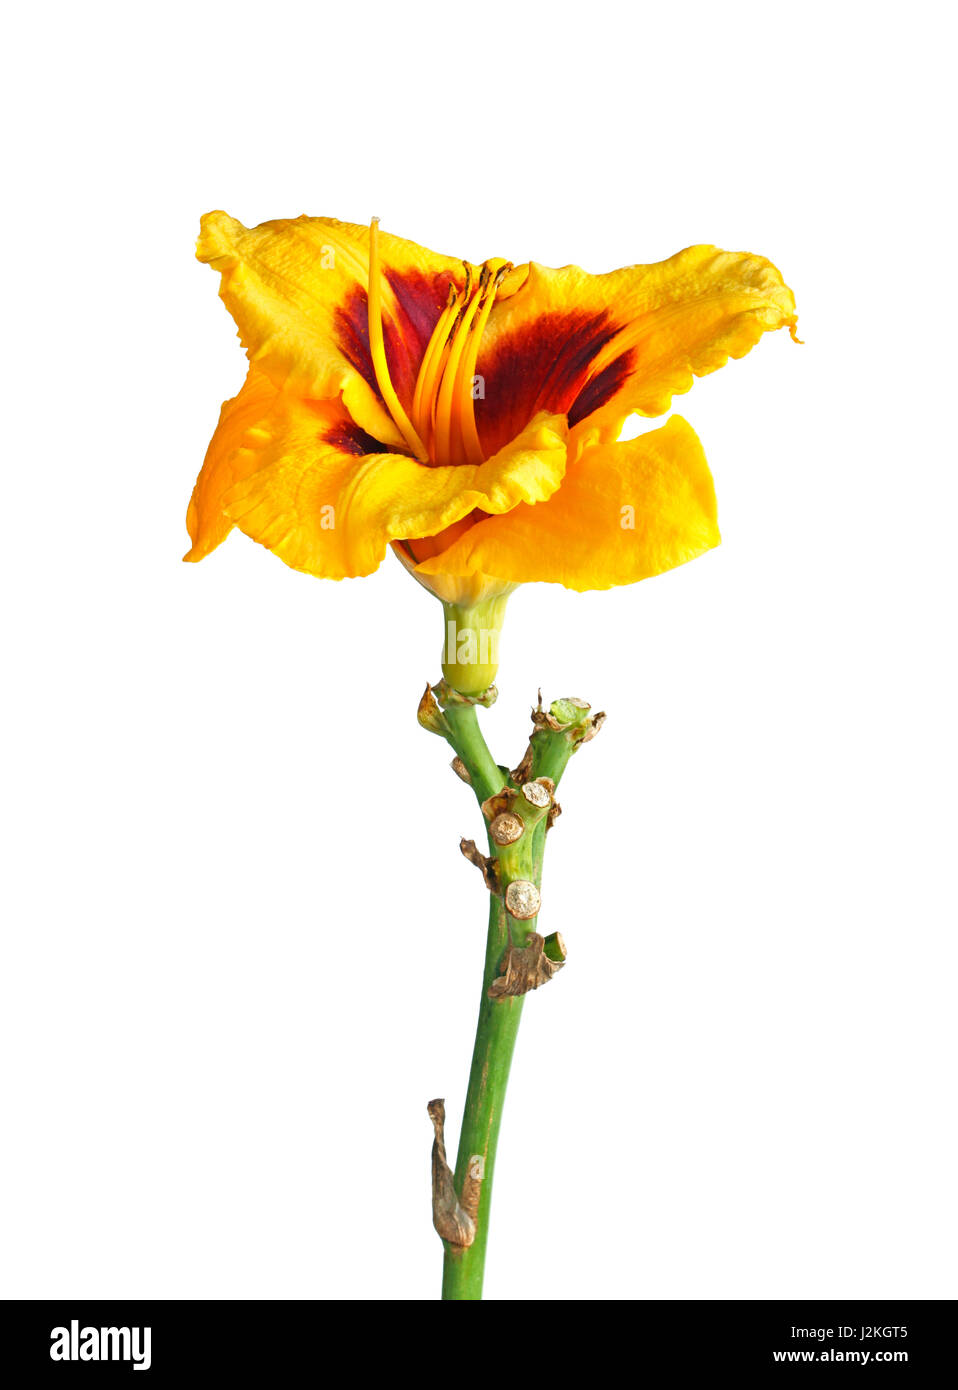 Single stem with a red and yellow flower of a daylily (Hemerocallis hybrid) isolated against a white background Stock Photo